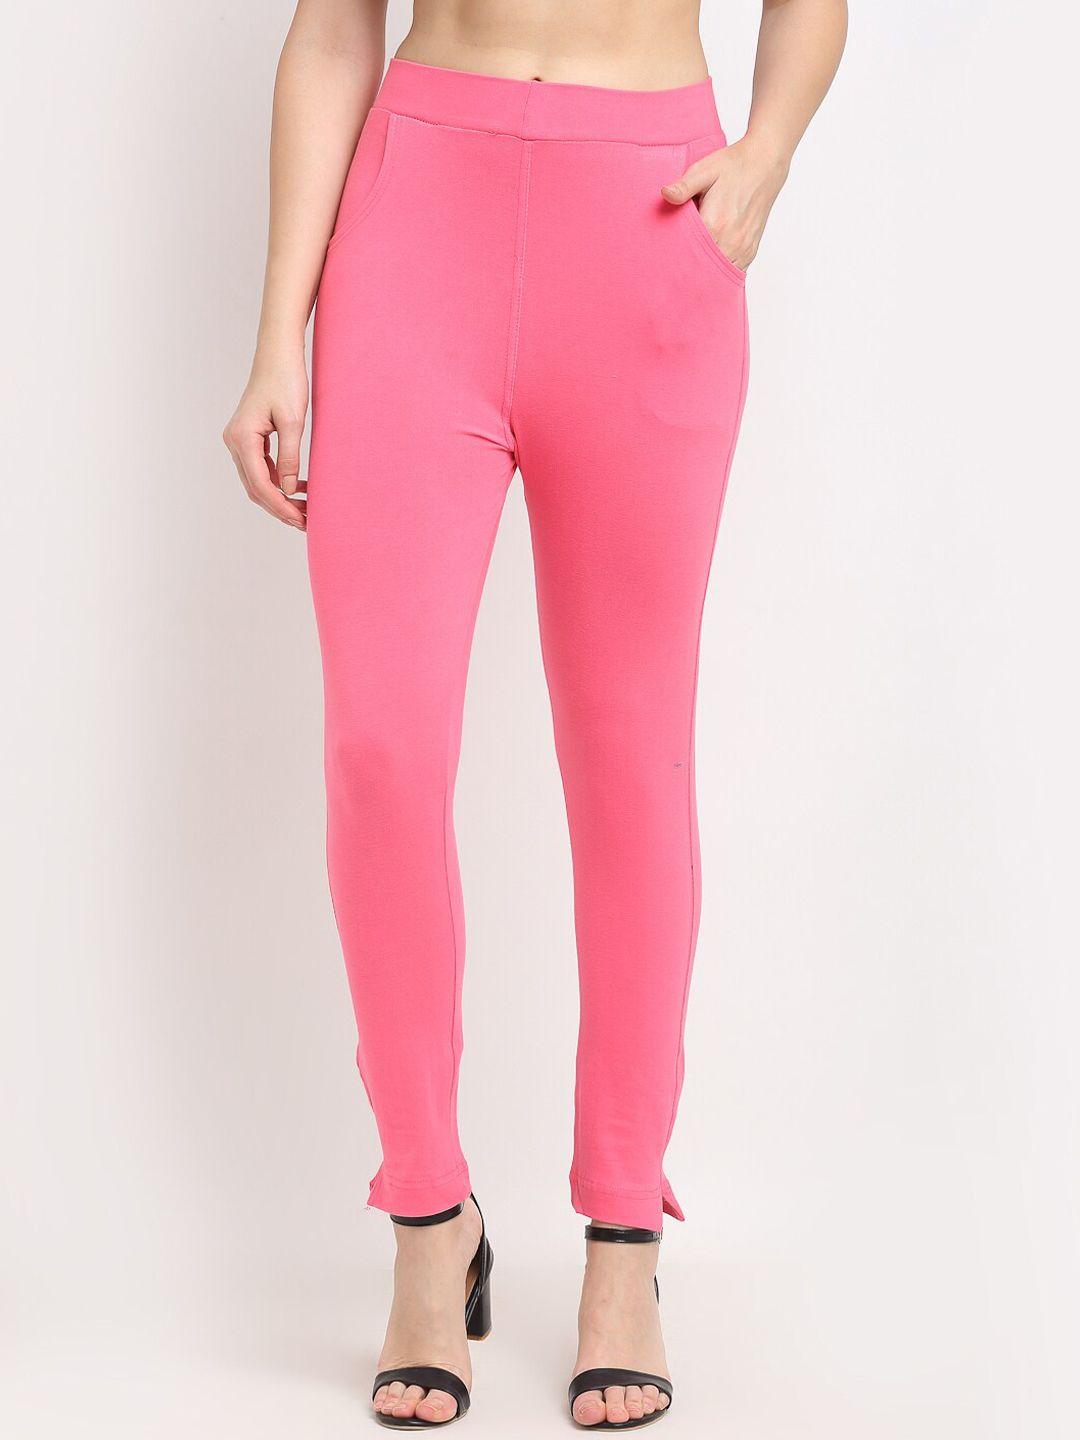 tag 7 women pink solid ankle-length leggings